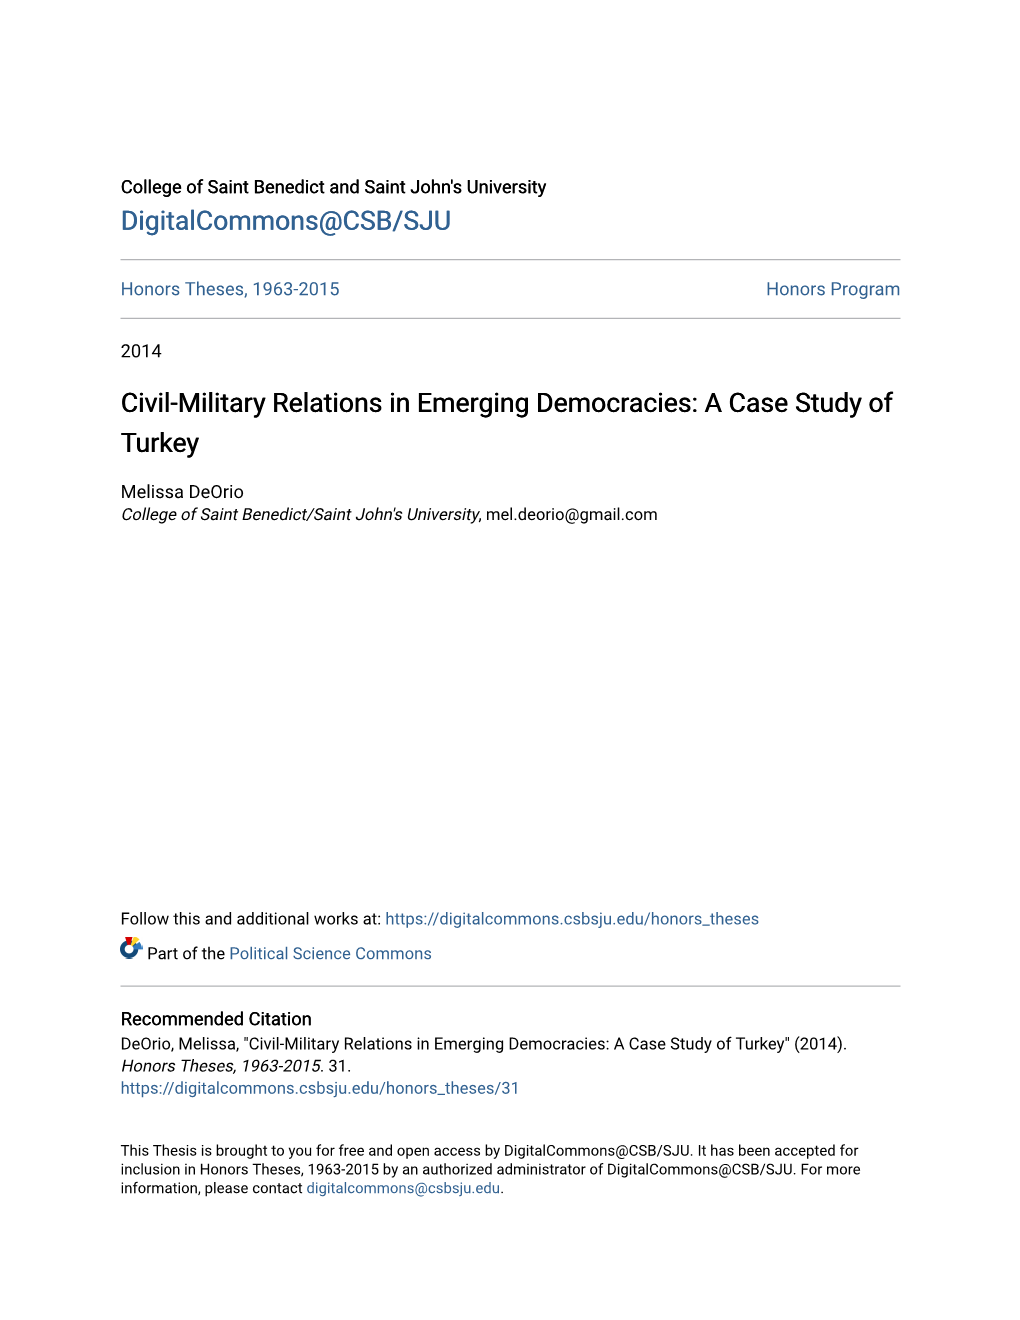 Civil-Military Relations in Emerging Democracies: a Case Study of Turkey